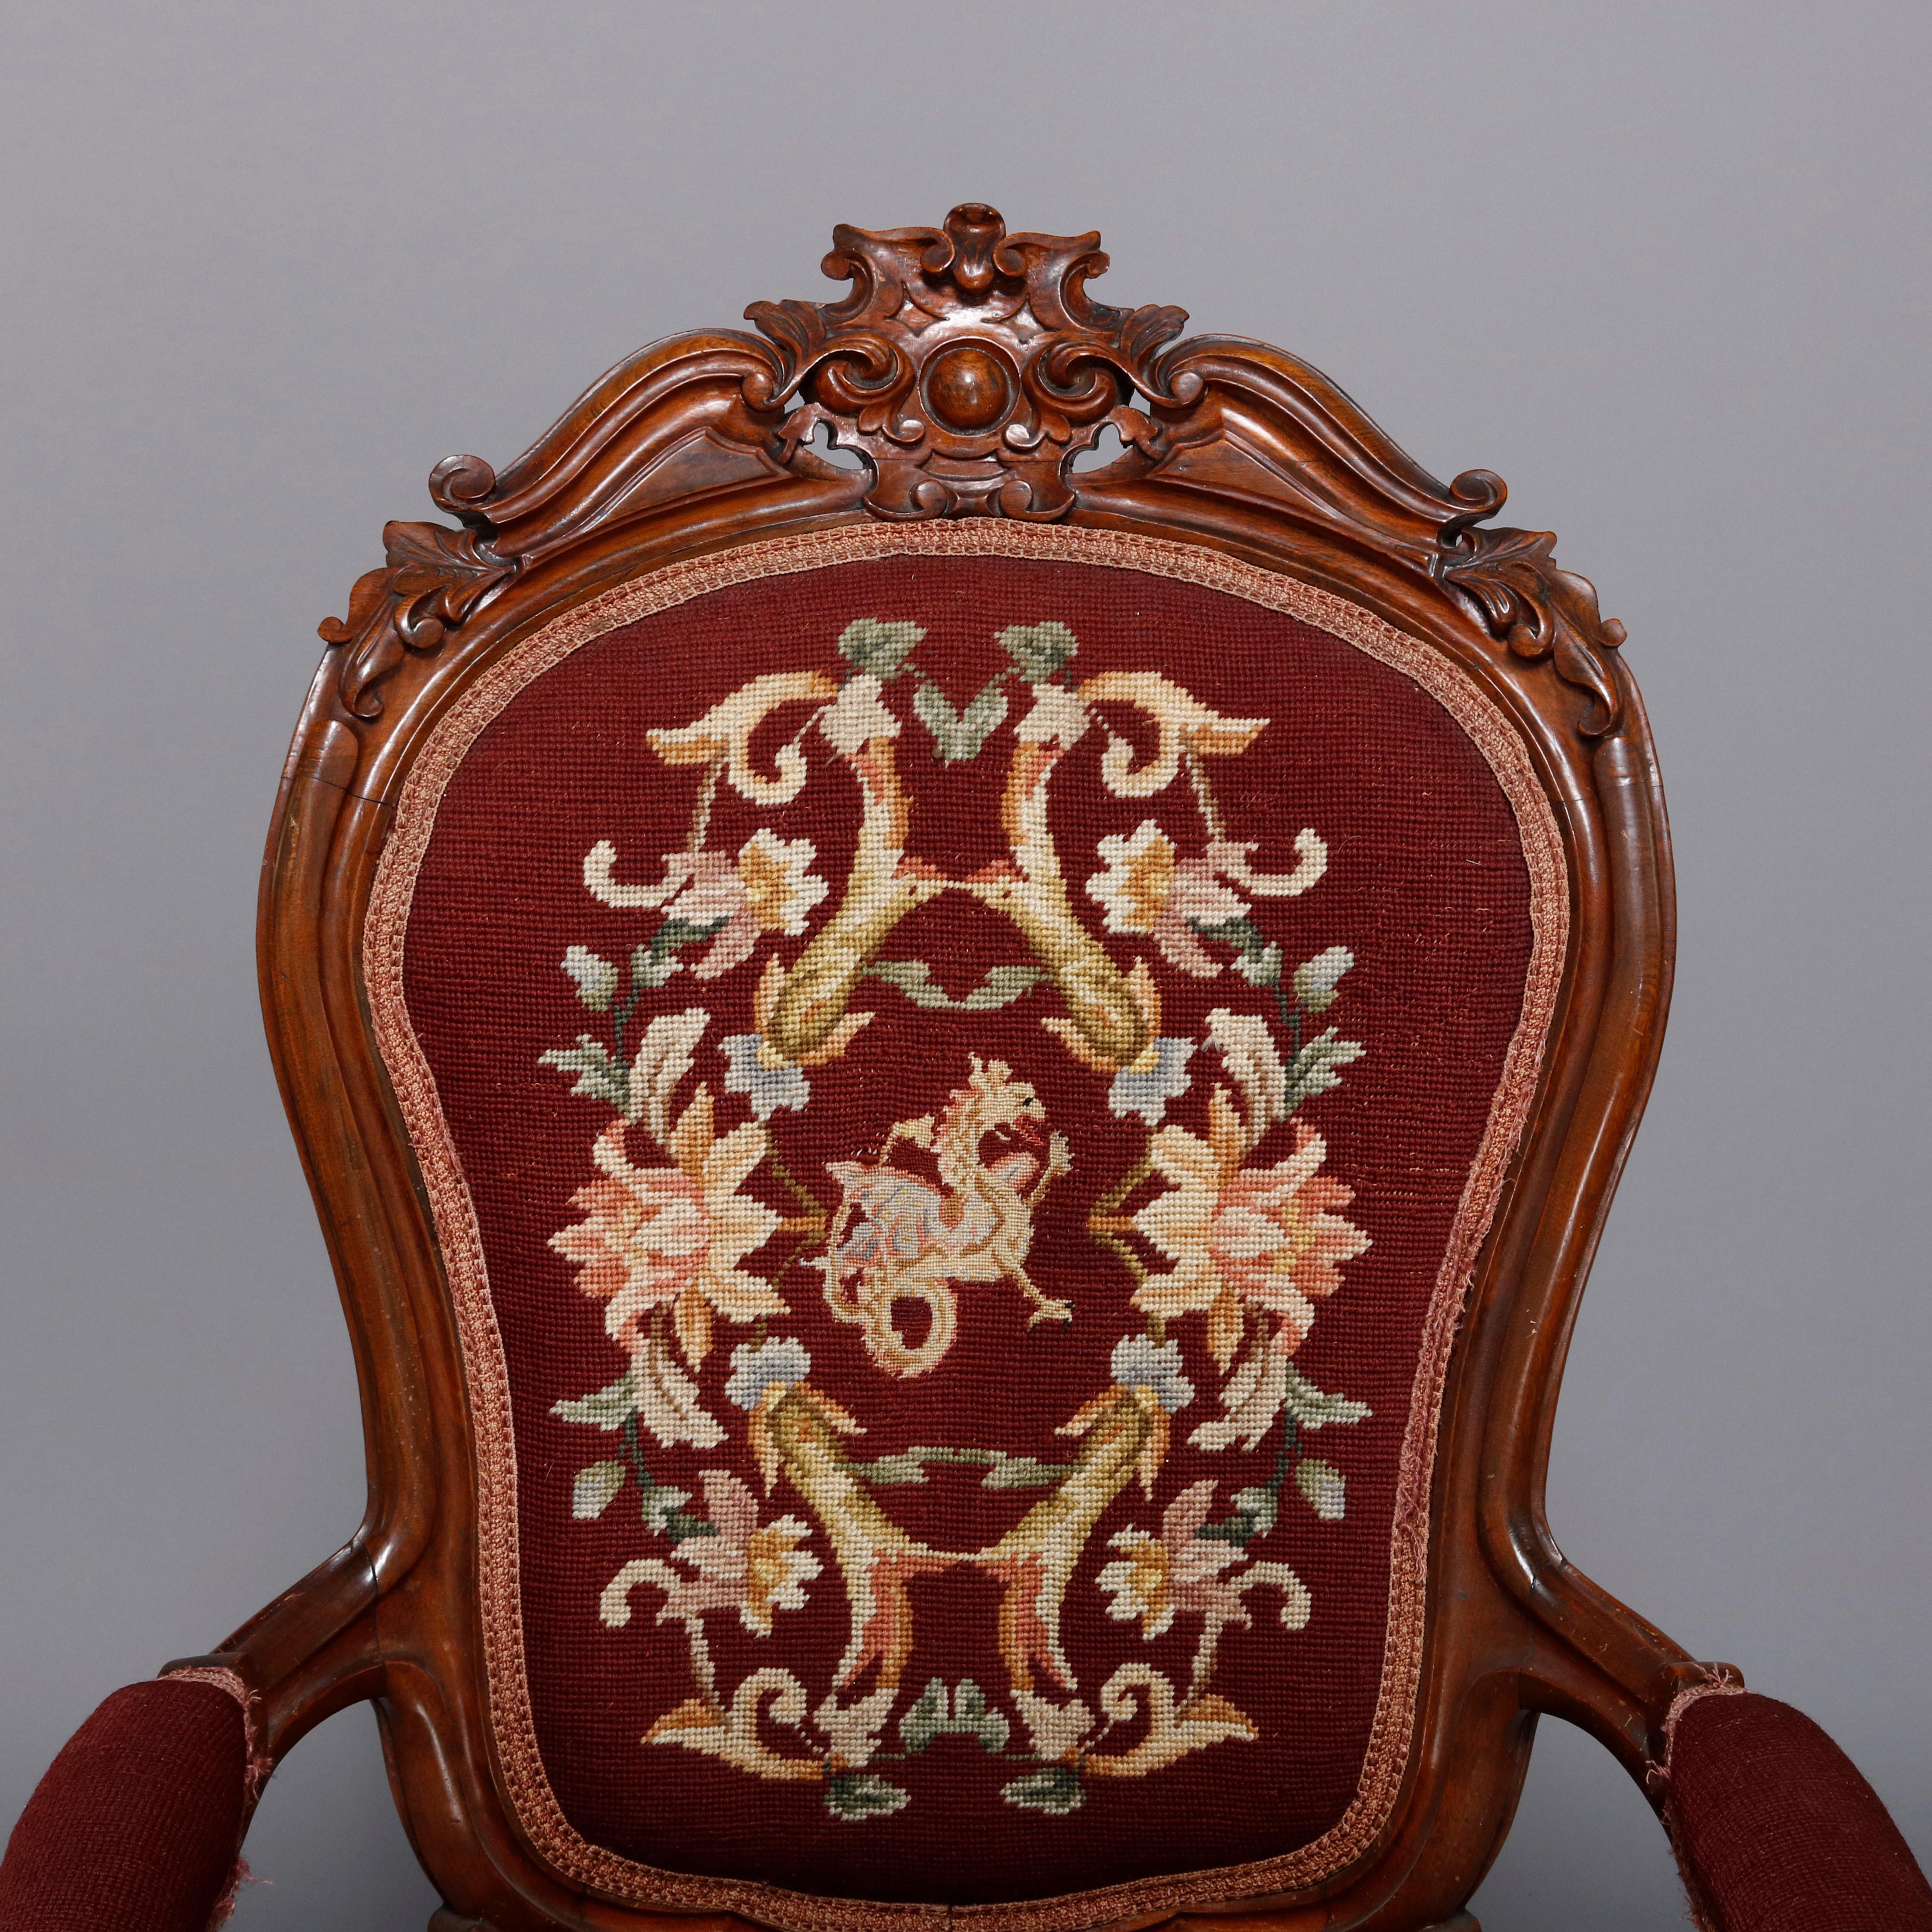 American Antique Victorian Carved Rosewood Needlepoint Gentleman's Parlor Armchair